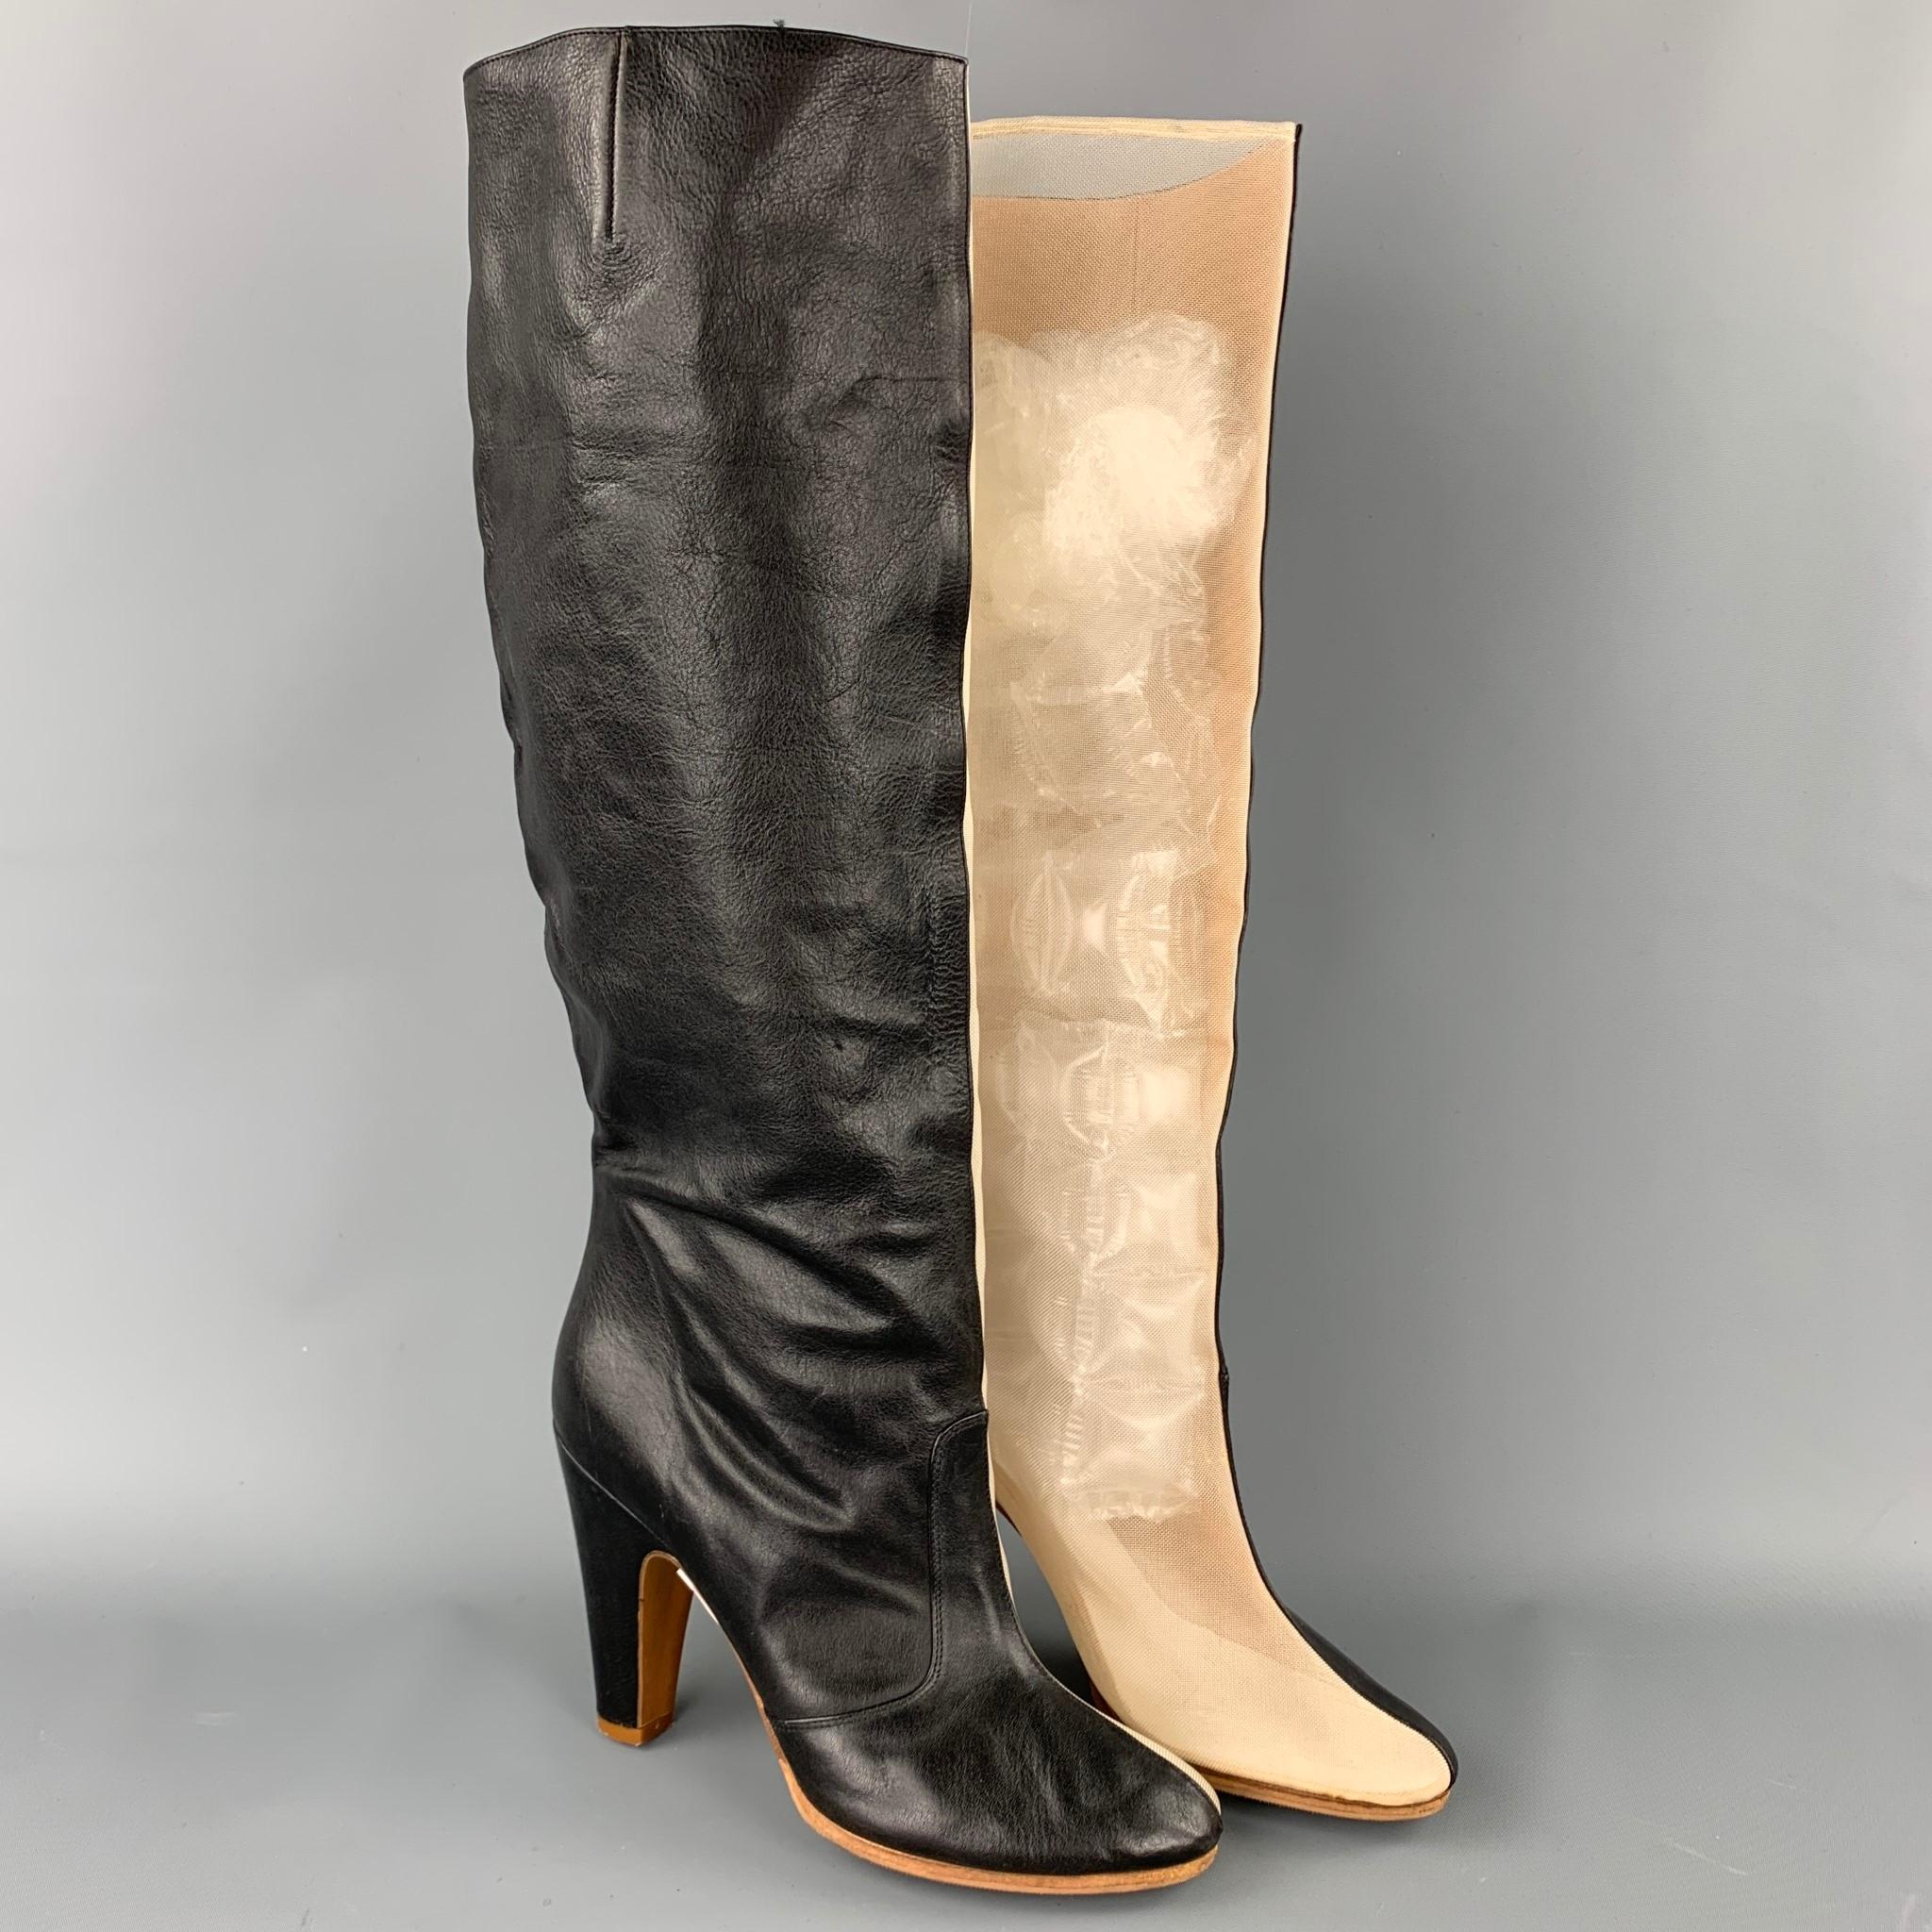 MAISON MARGIELA boots comes in a black leather with a beige mesh trim design featuring a knee high style, slip on, and a chunky heel. Moderate wear. Made in Italy.

Good Pre-Owned Condition.
Marked: EU 40

Measurements:

Length: 8 in.
Width: 3